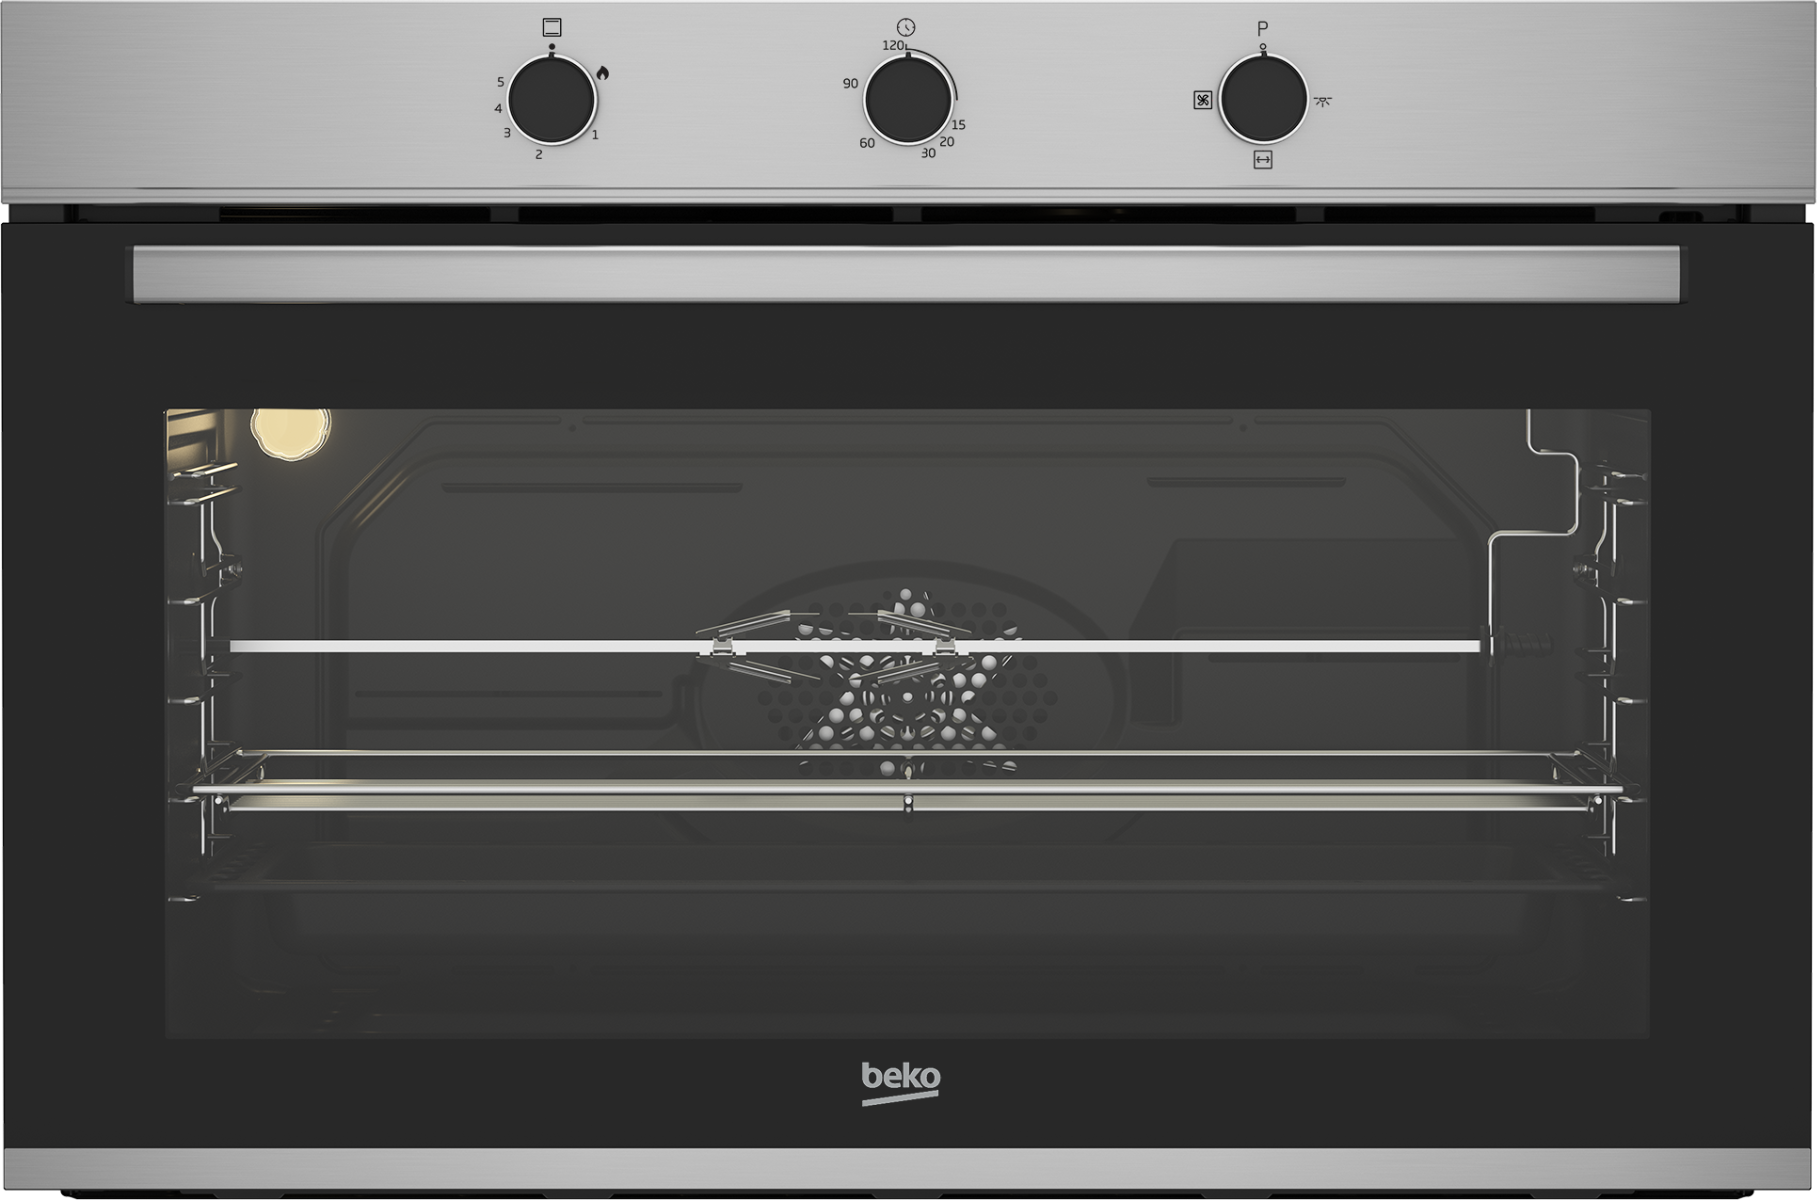 Beko Built-in Gas Oven, 96 Liters,  90cm, Silver and Black - BBWHT12104XS